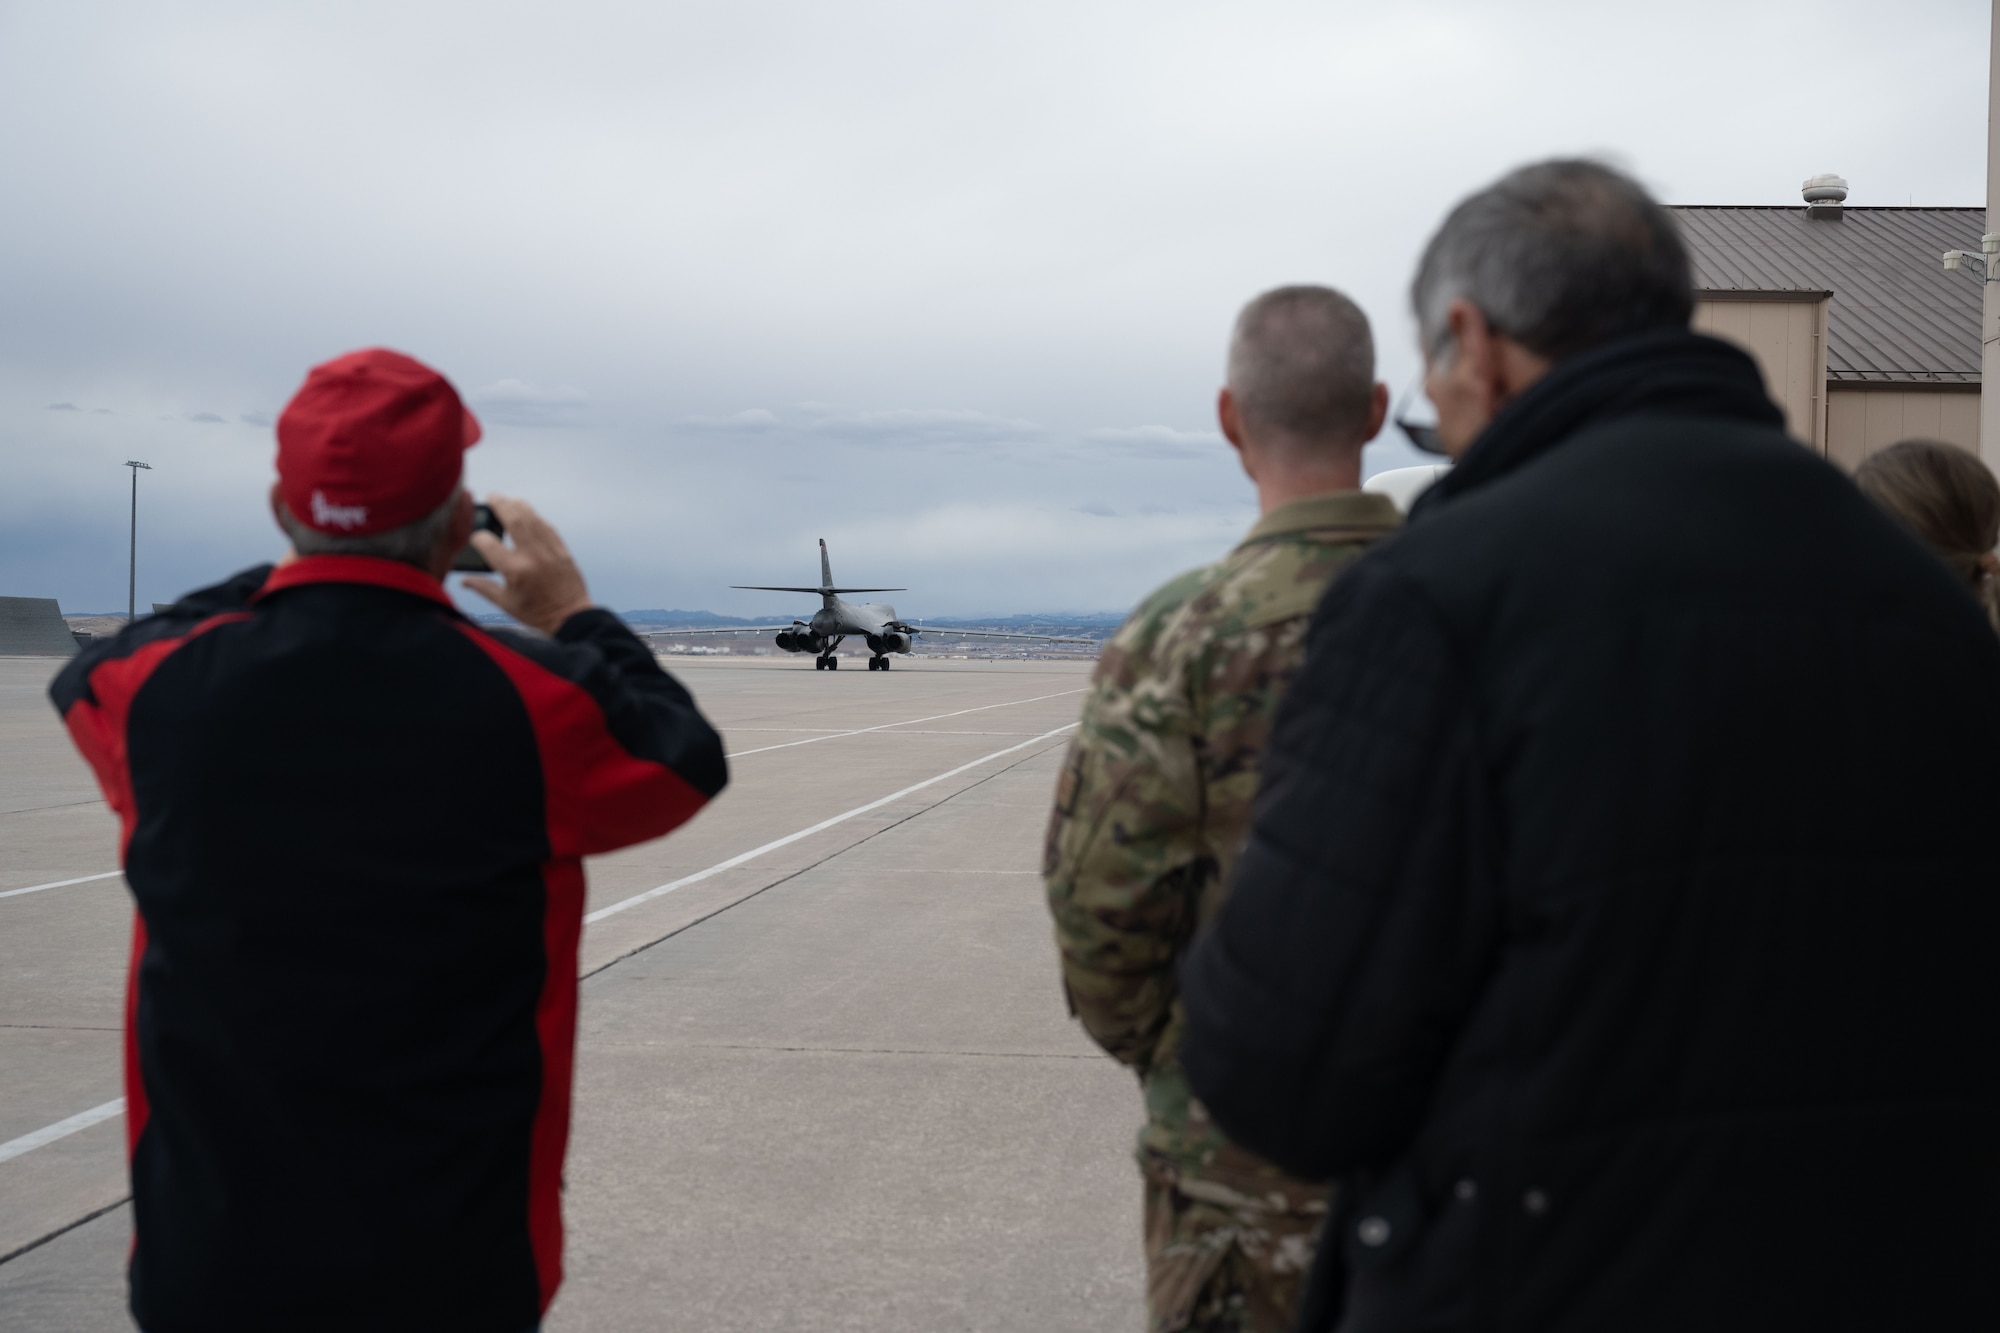 Community and business leaders from the greater Cheyenne area participating in a civic leader tour hosted by the 90th Missile Wing at F.E. Warren Air Force Base, Wyoming, watch as a B-1B Lancer taxis prior to take off as part of the group’s visit to Ellsworth AFB, South Dakota, Feb. 8, 2023.